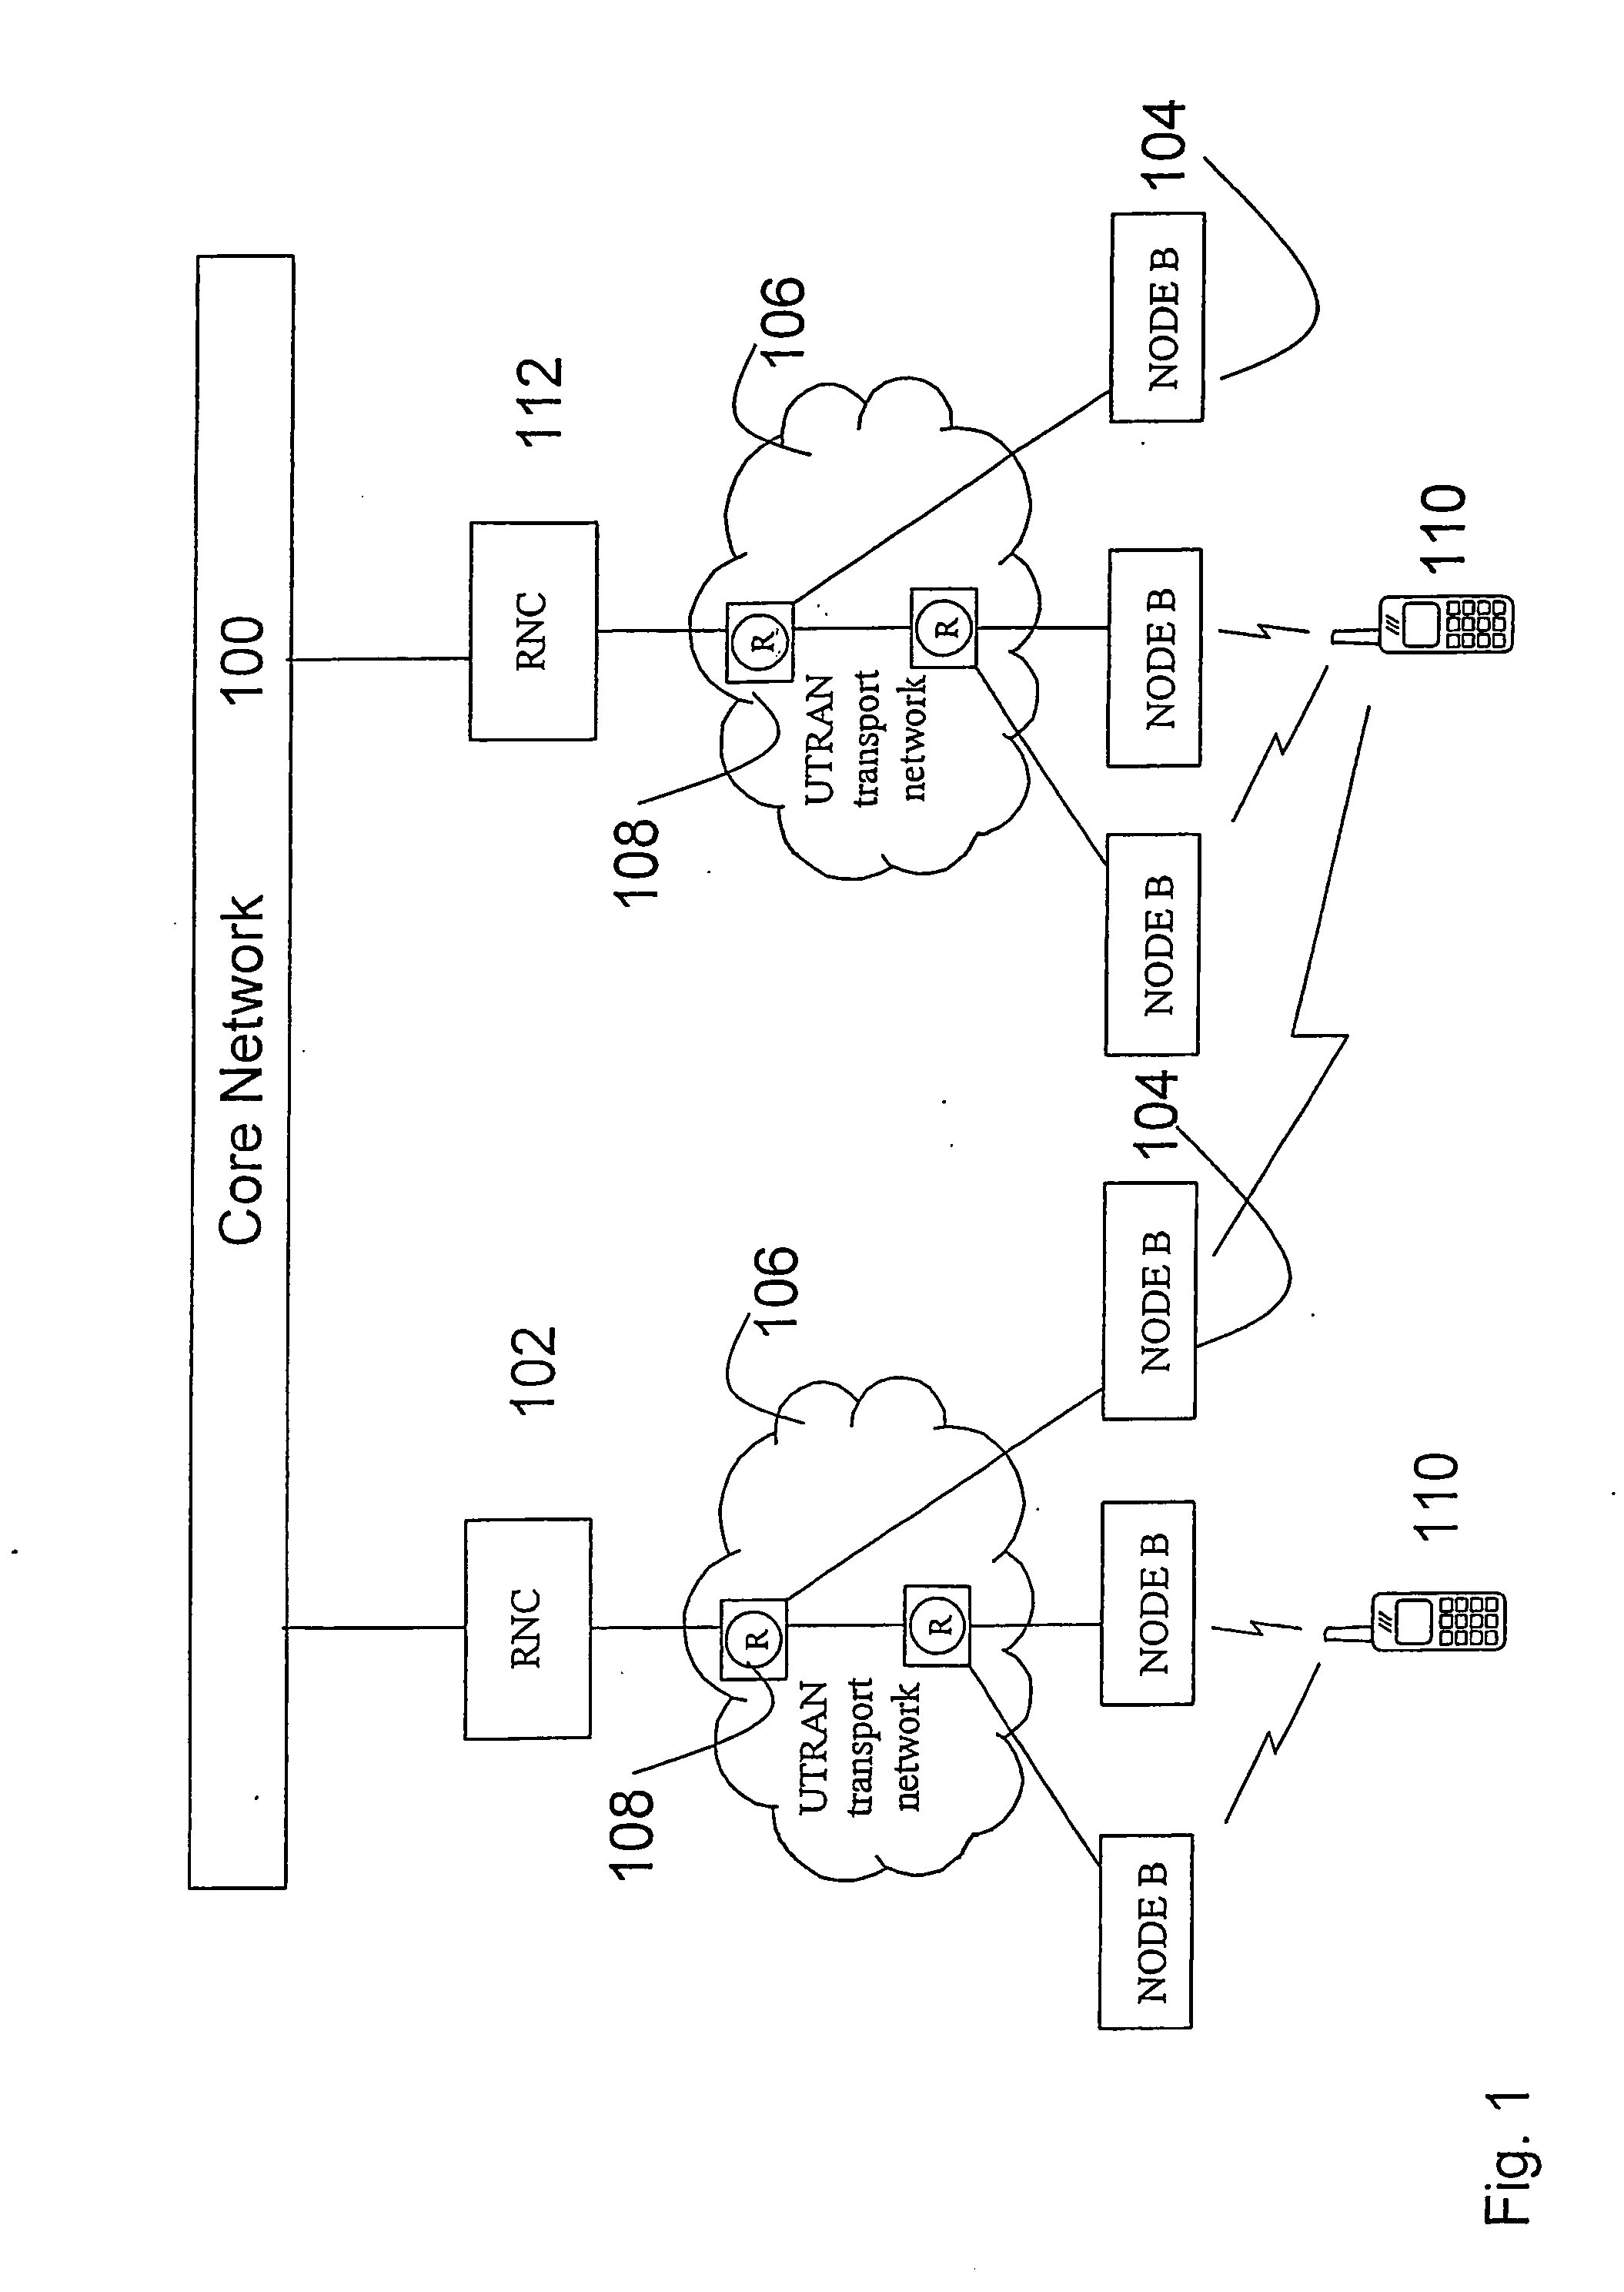 Arrangements and method for handling macro diversity in a universal mobile telecommunications system